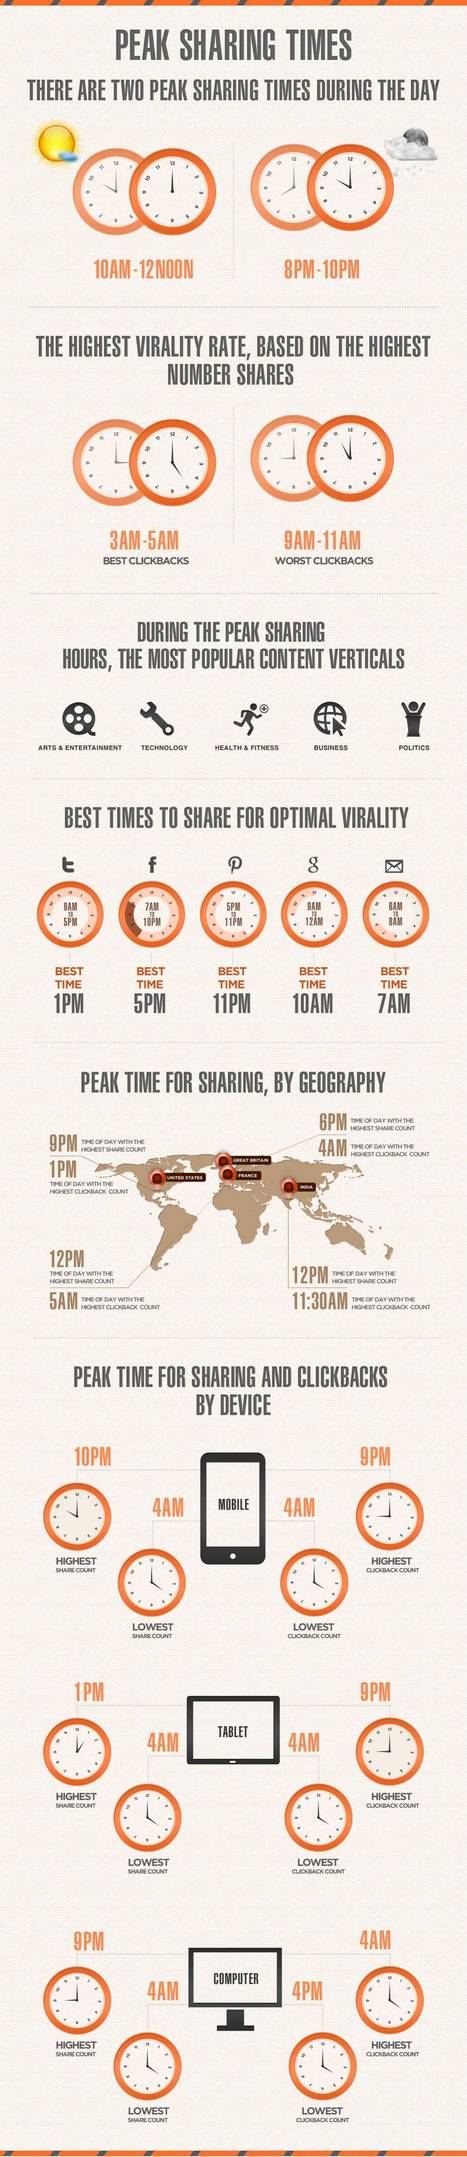 Best Time For Sharing Content [Infographic] | Business Improvement and Social media | Scoop.it